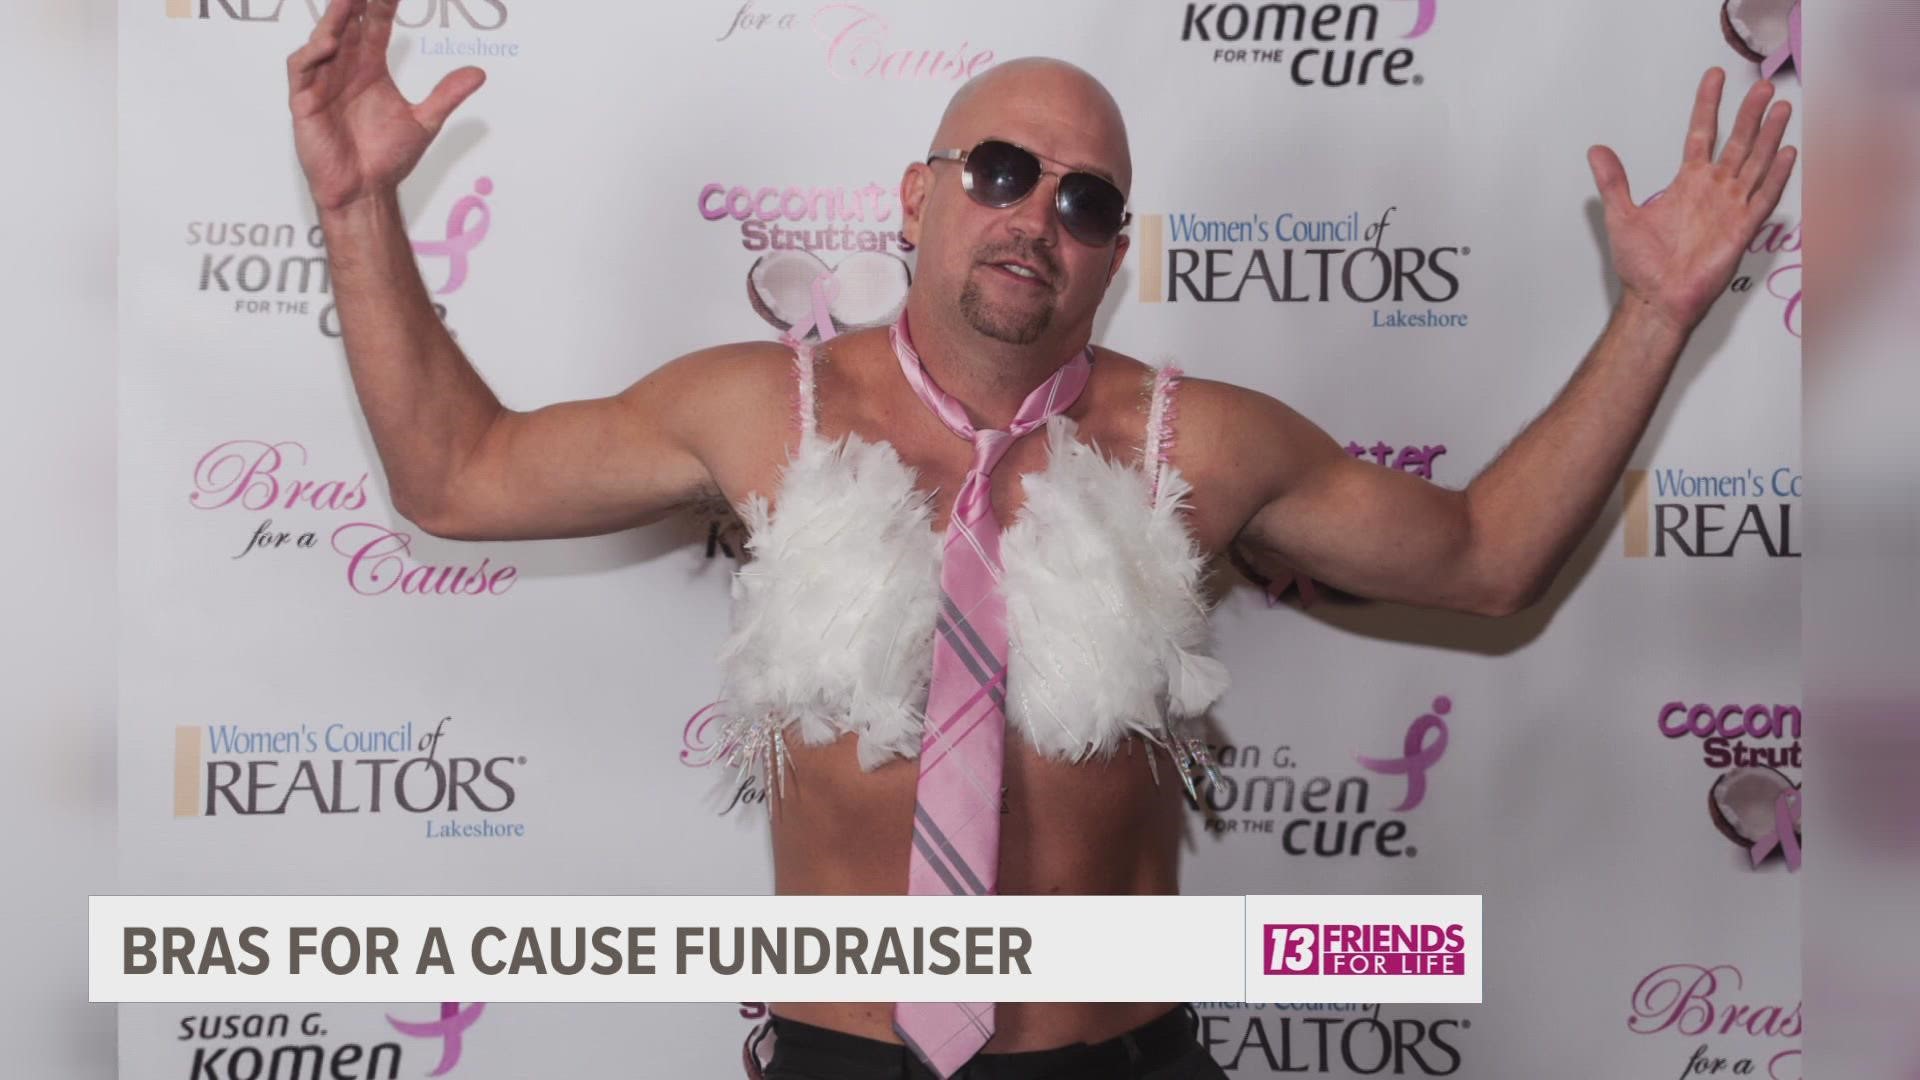 In this event fundraising for a West Michigan charity, men walk the runway in support of breast cancer.